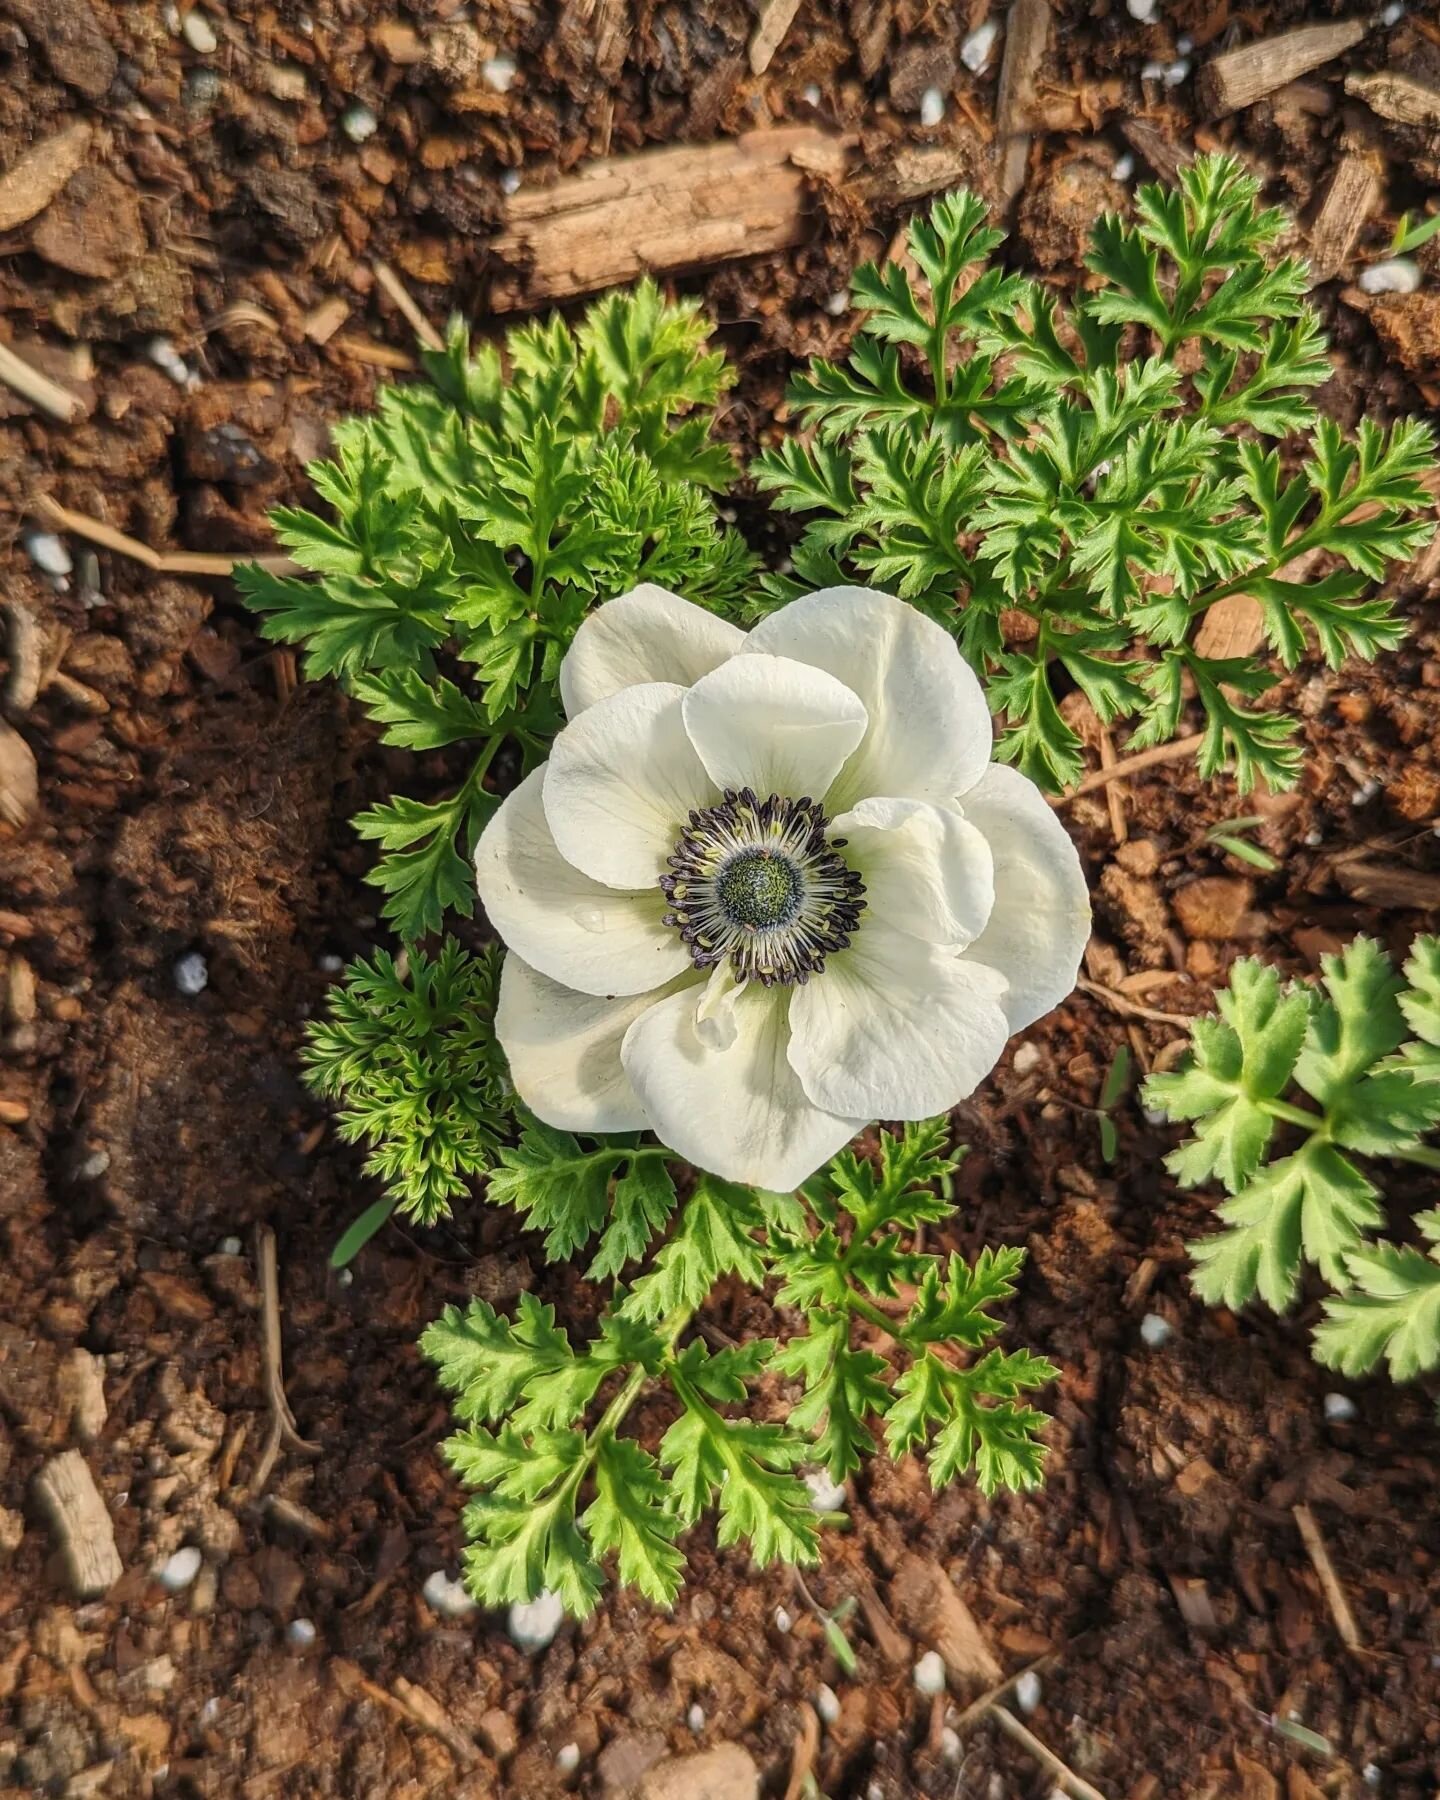 The very first flower to bloom here on our farm is always the anemone. Always starting out on a teeny tiny 1 inch stem, this beauty will grow so much in length as spring progresses. This, my friends, is the beginning!! 🌷💐🪻